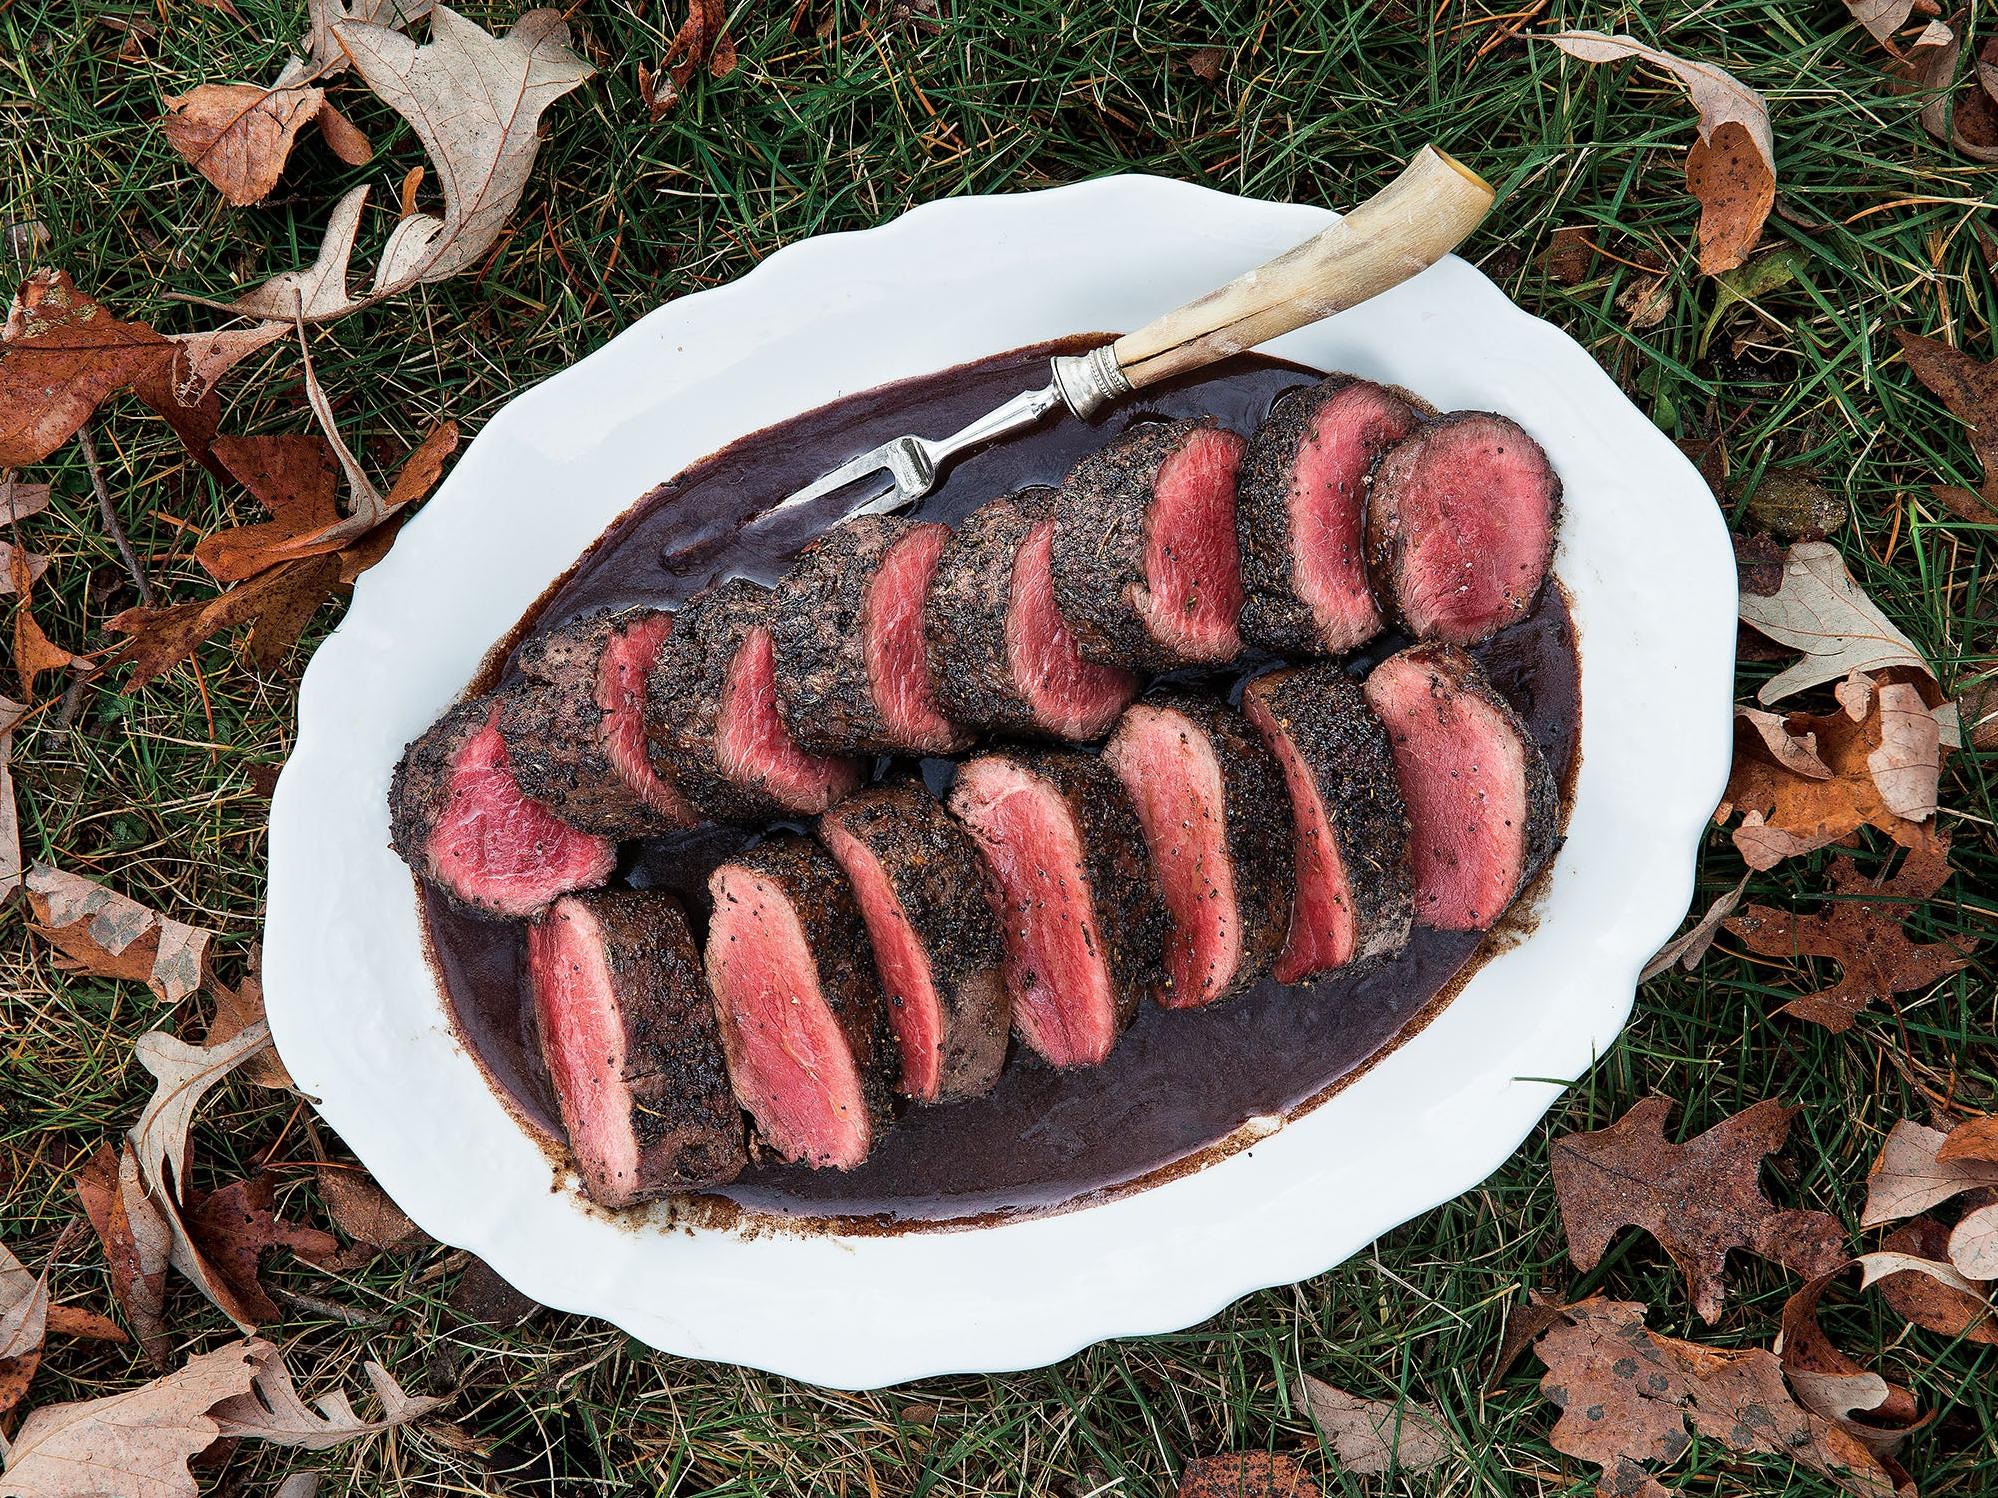  A match made in heaven: tender venison paired with a Cabernet and Sauternes sauce